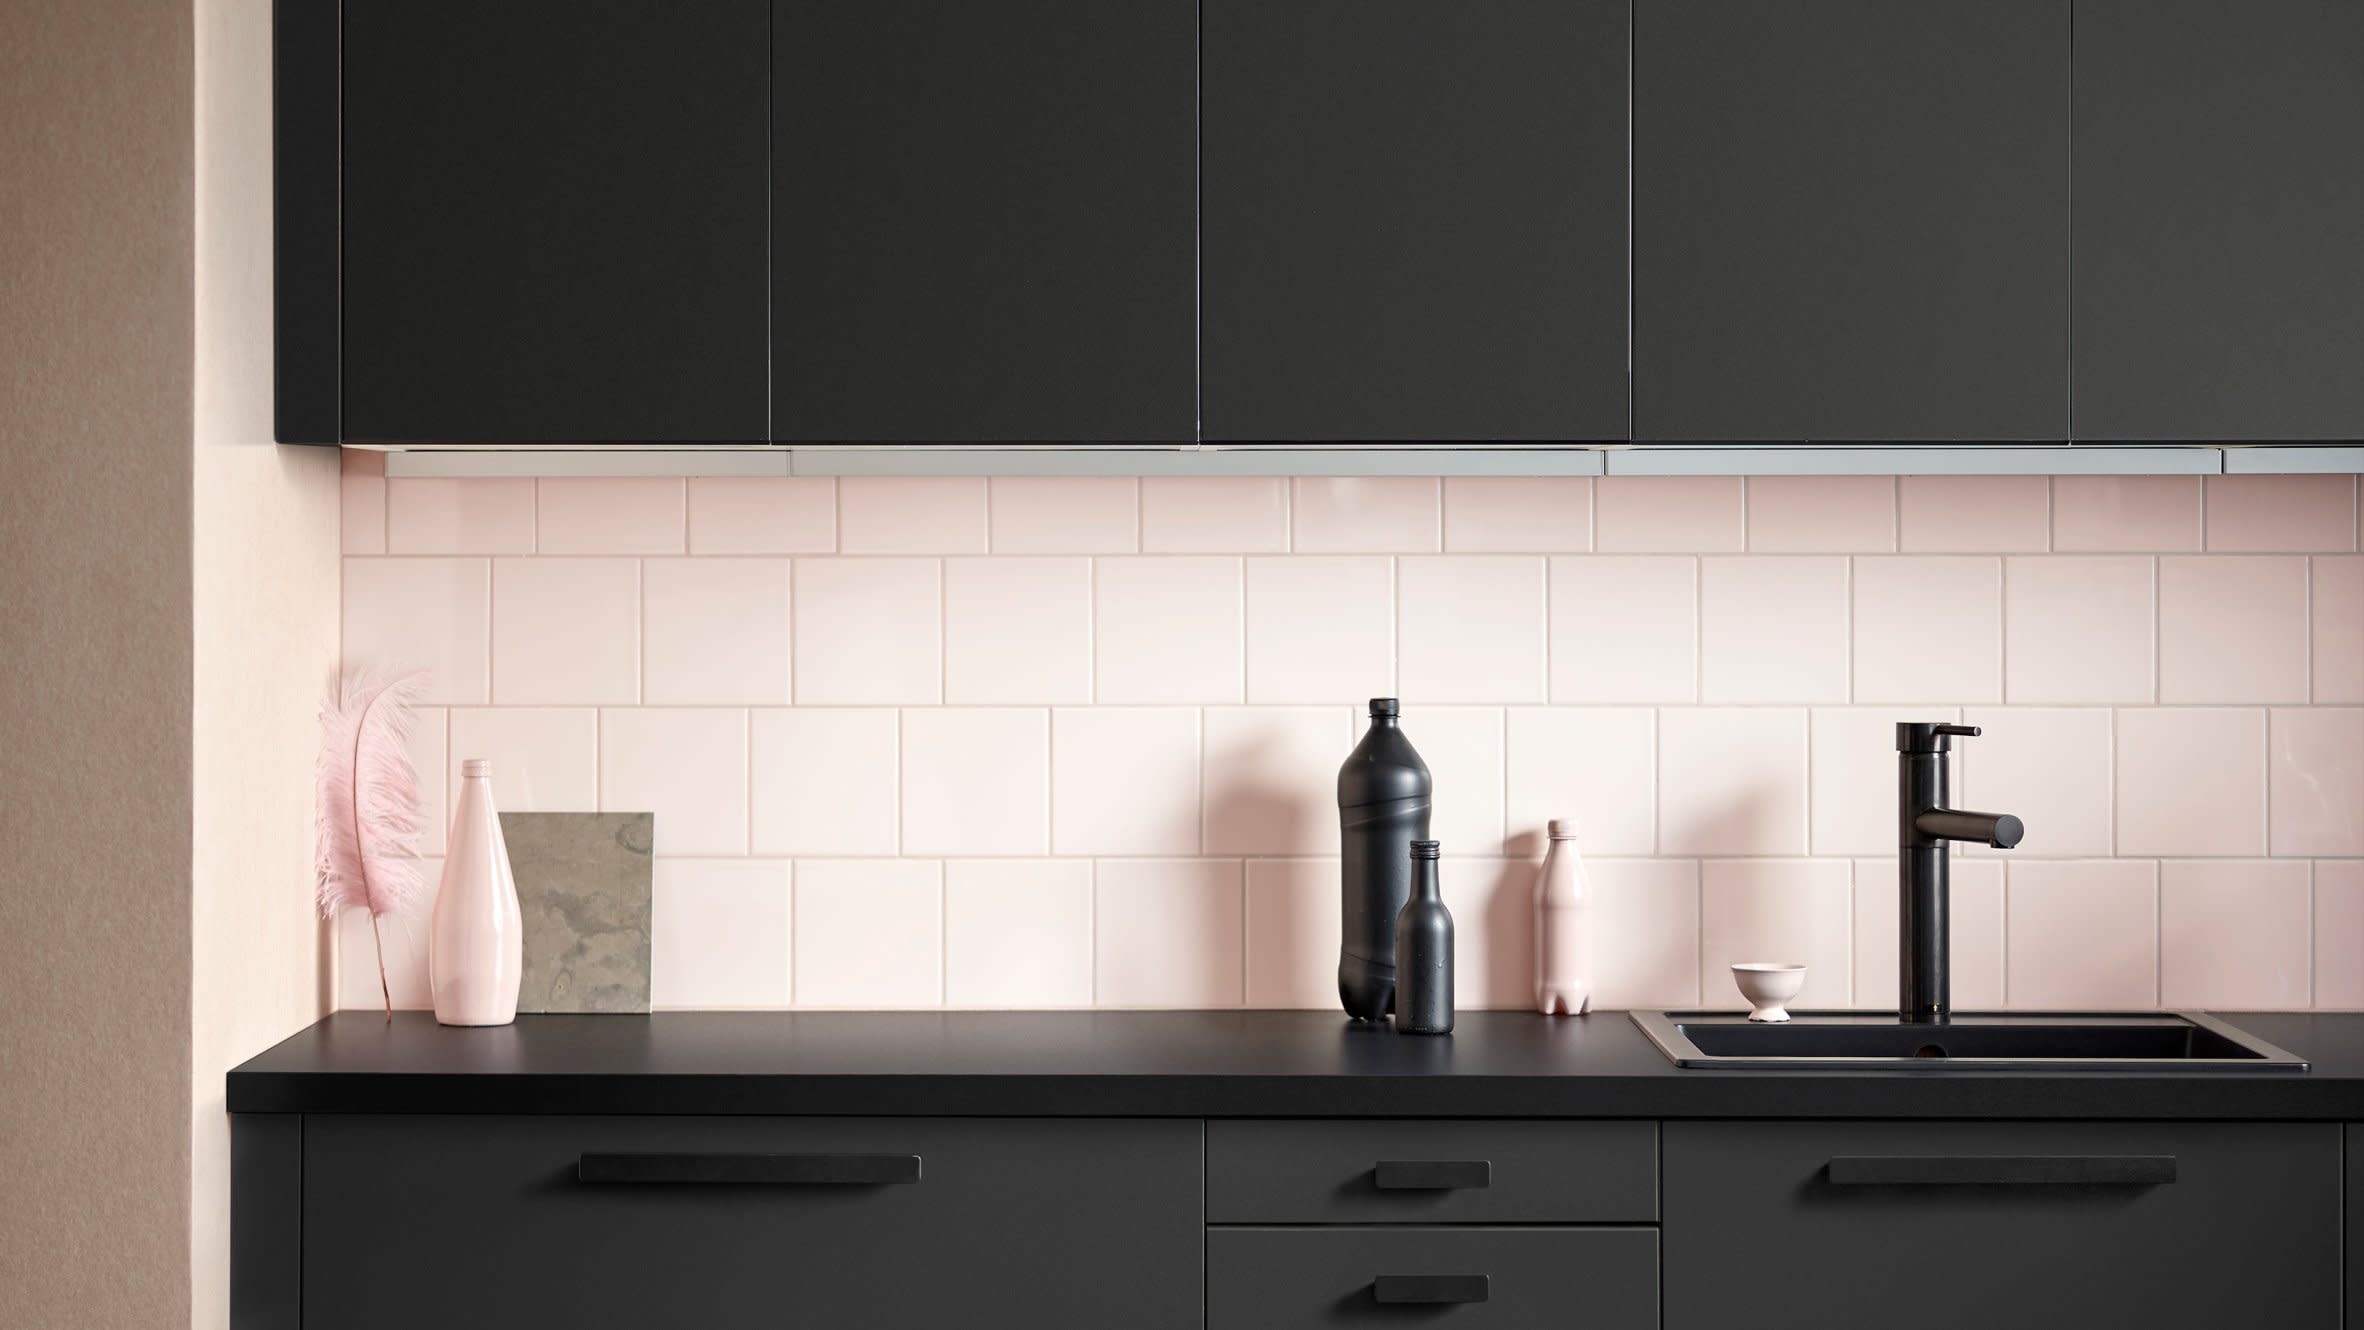 ikea's new kitchen cabinets are made from recycled bottles